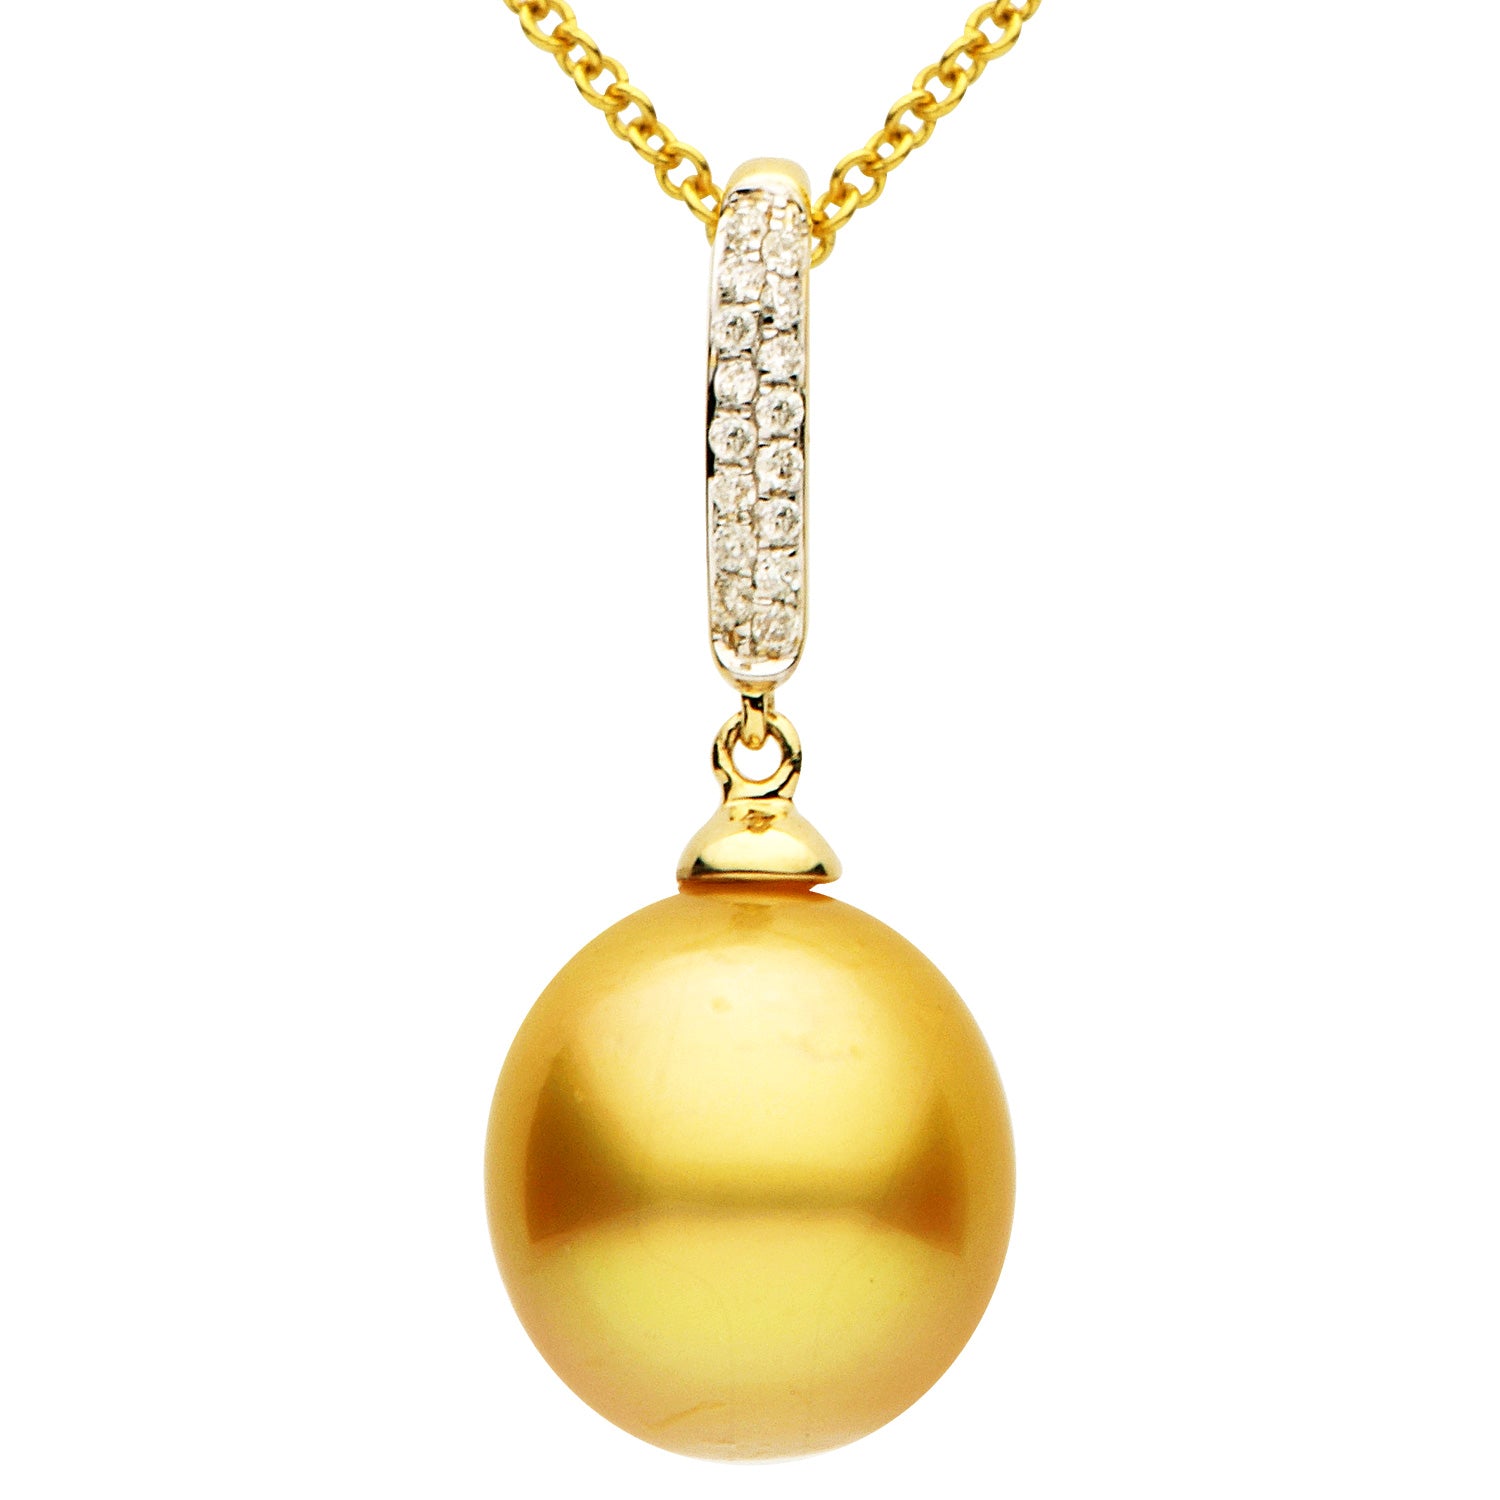 14KY Golden South Sea Pearl Pendant, 9-10mm